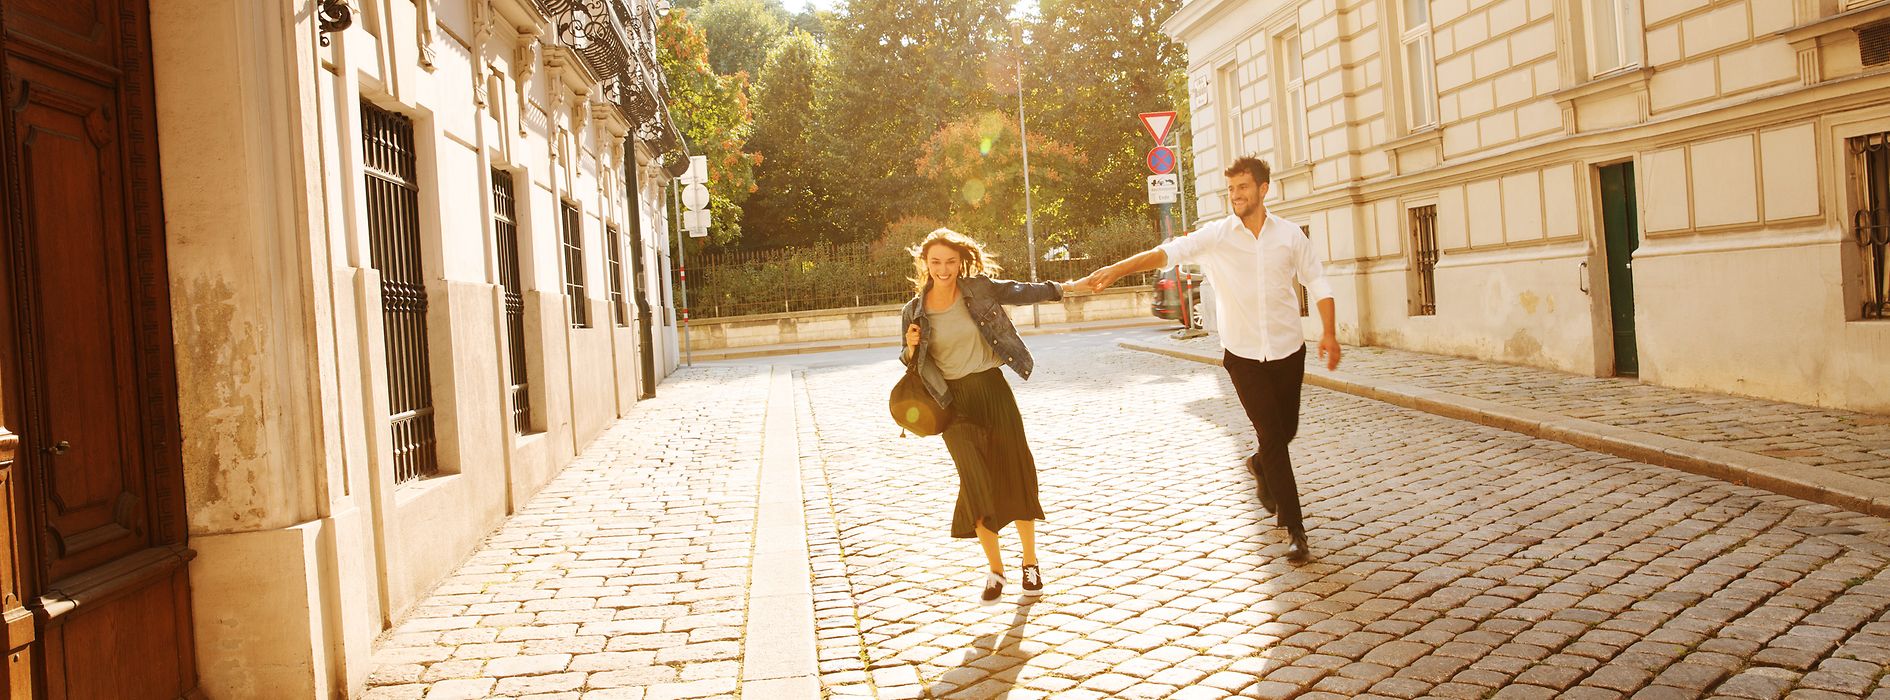 Couple walking in the city center, 